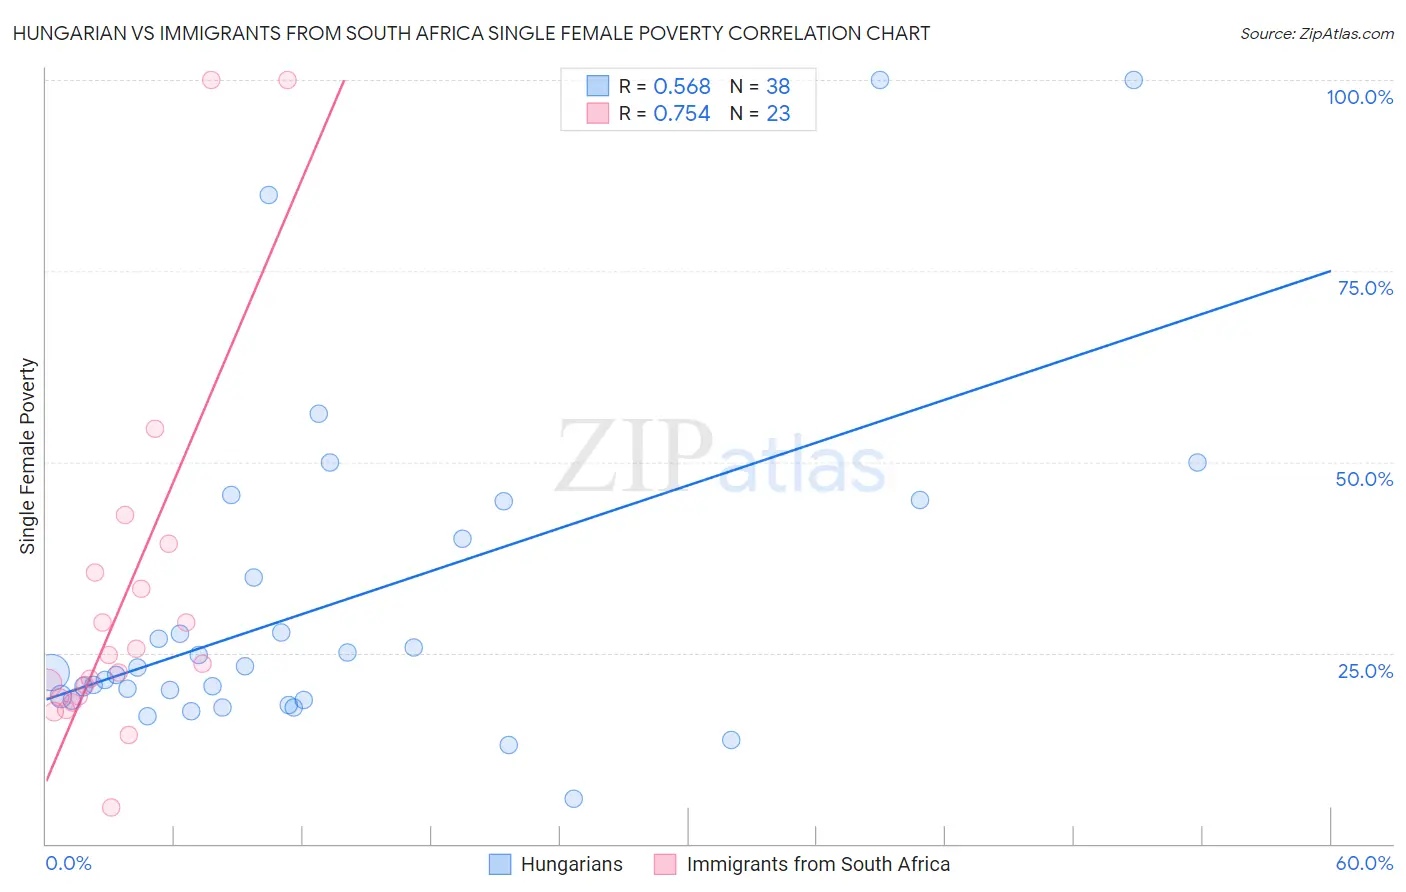 Hungarian vs Immigrants from South Africa Single Female Poverty